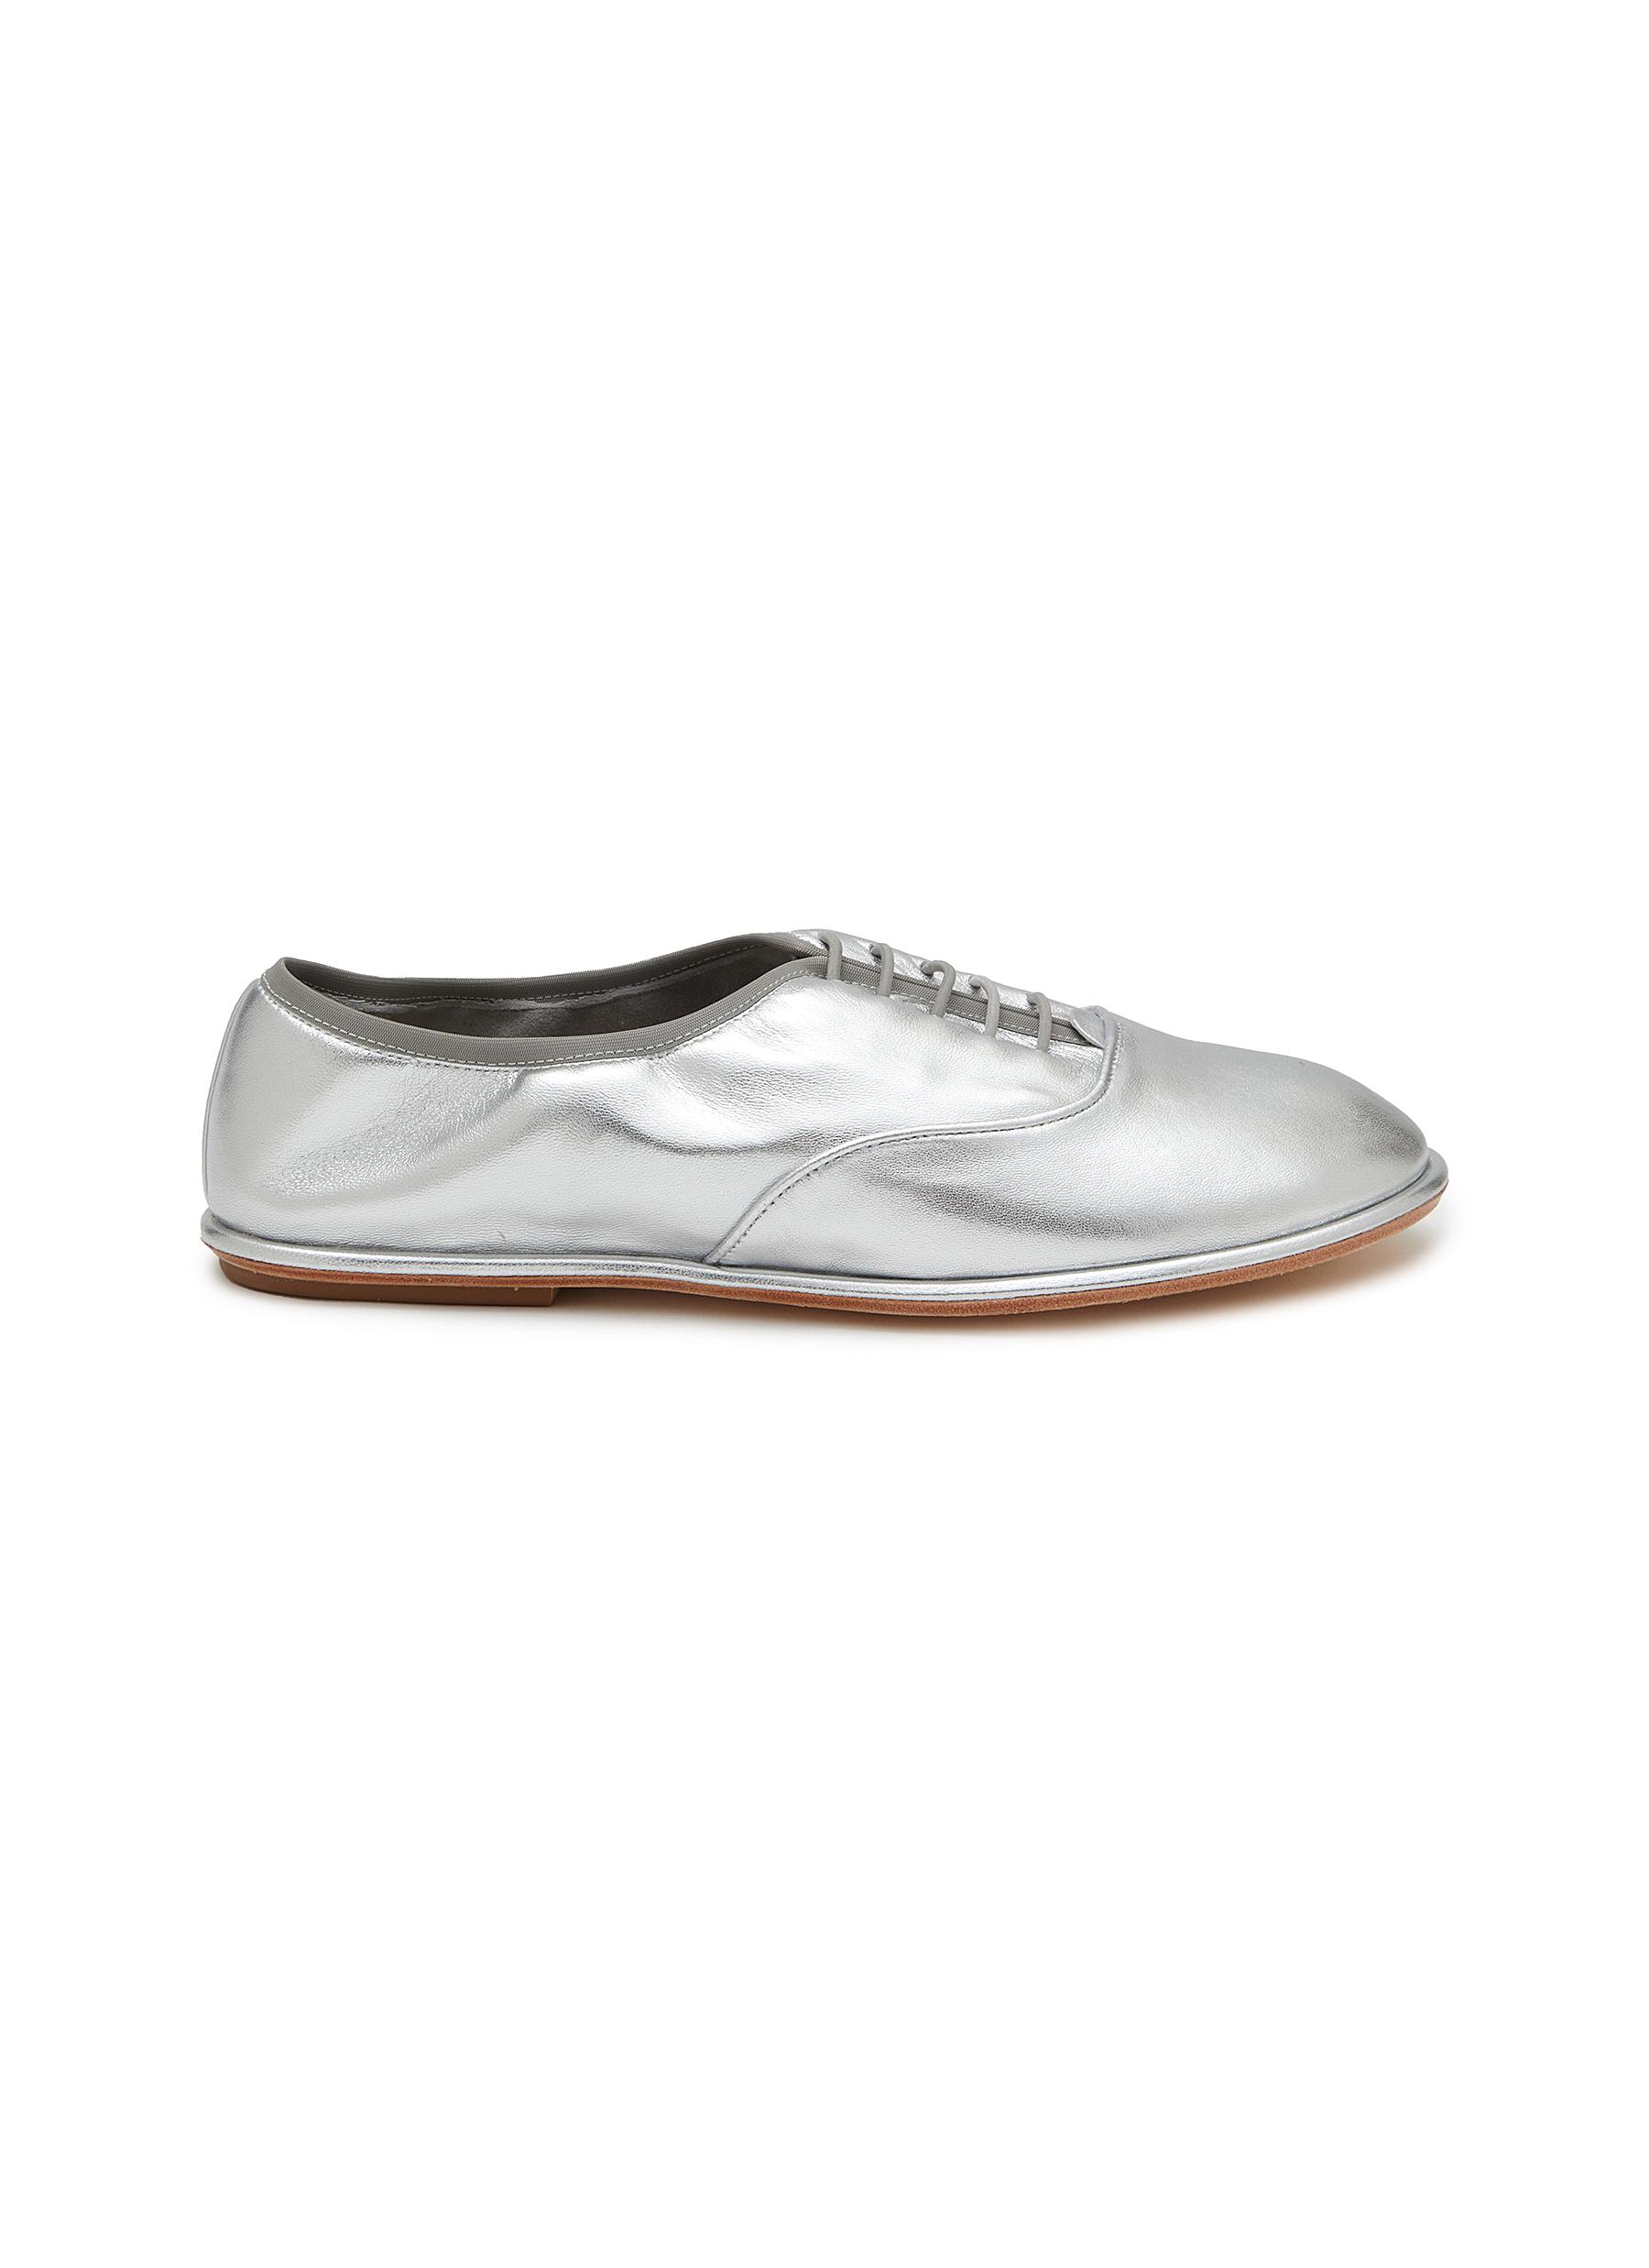 Brussels Metallic Leather Lace Up Flats